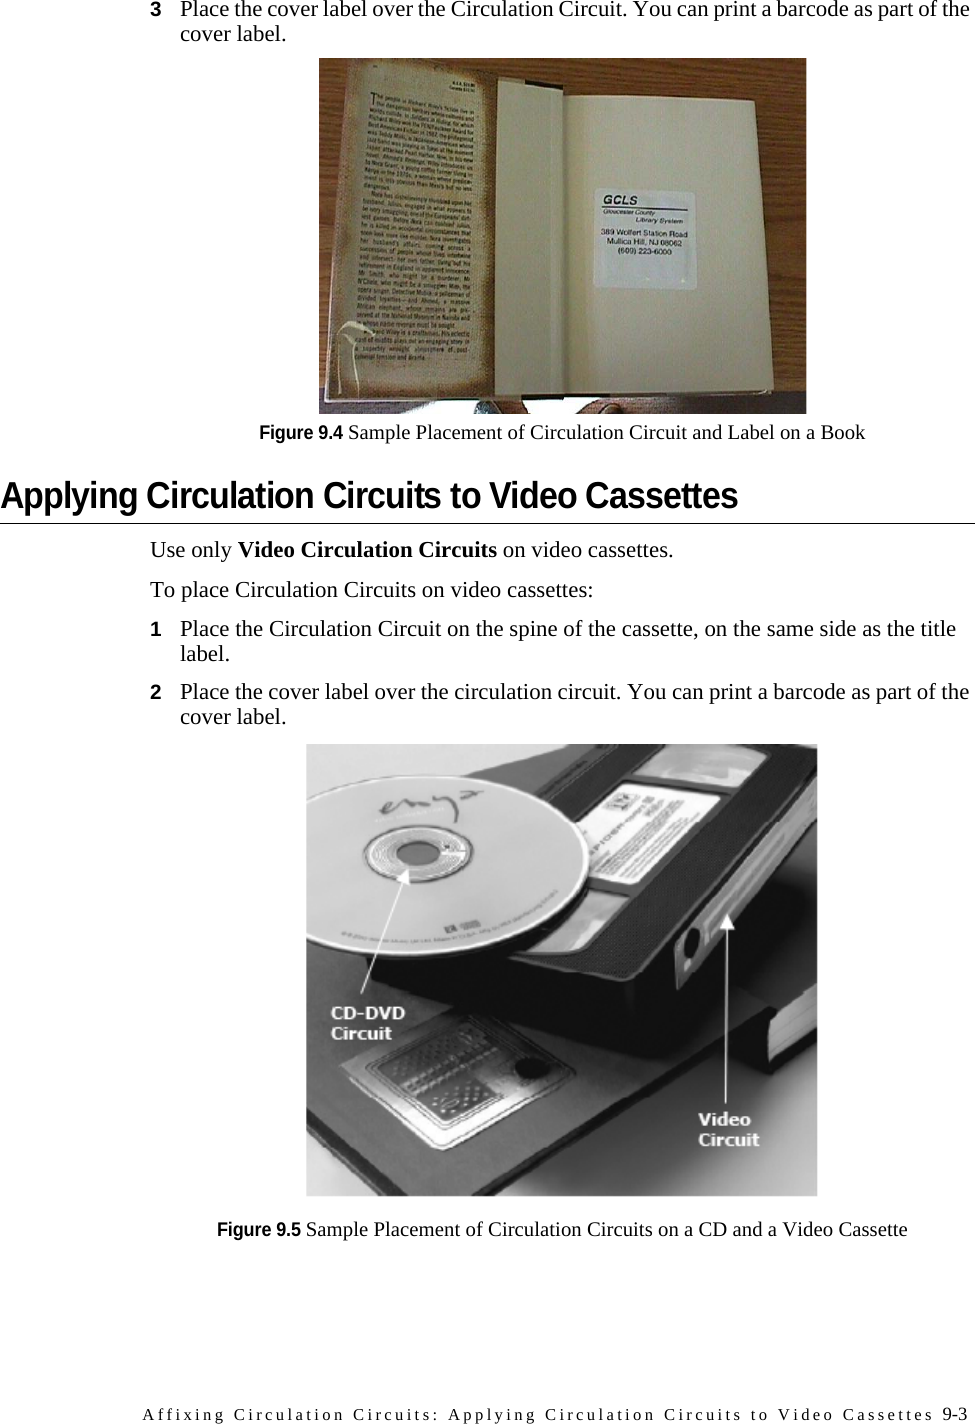 Affixing Circulation Circuits: Applying Circulation Circuits to Video Cassettes 9-33Place the cover label over the Circulation Circuit. You can print a barcode as part of the cover label.Figure 9.4 Sample Placement of Circulation Circuit and Label on a Book Applying Circulation Circuits to Video CassettesUse only Video Circulation Circuits on video cassettes.To place Circulation Circuits on video cassettes:1Place the Circulation Circuit on the spine of the cassette, on the same side as the title label.2Place the cover label over the circulation circuit. You can print a barcode as part of the cover label.Figure 9.5 Sample Placement of Circulation Circuits on a CD and a Video Cassette 